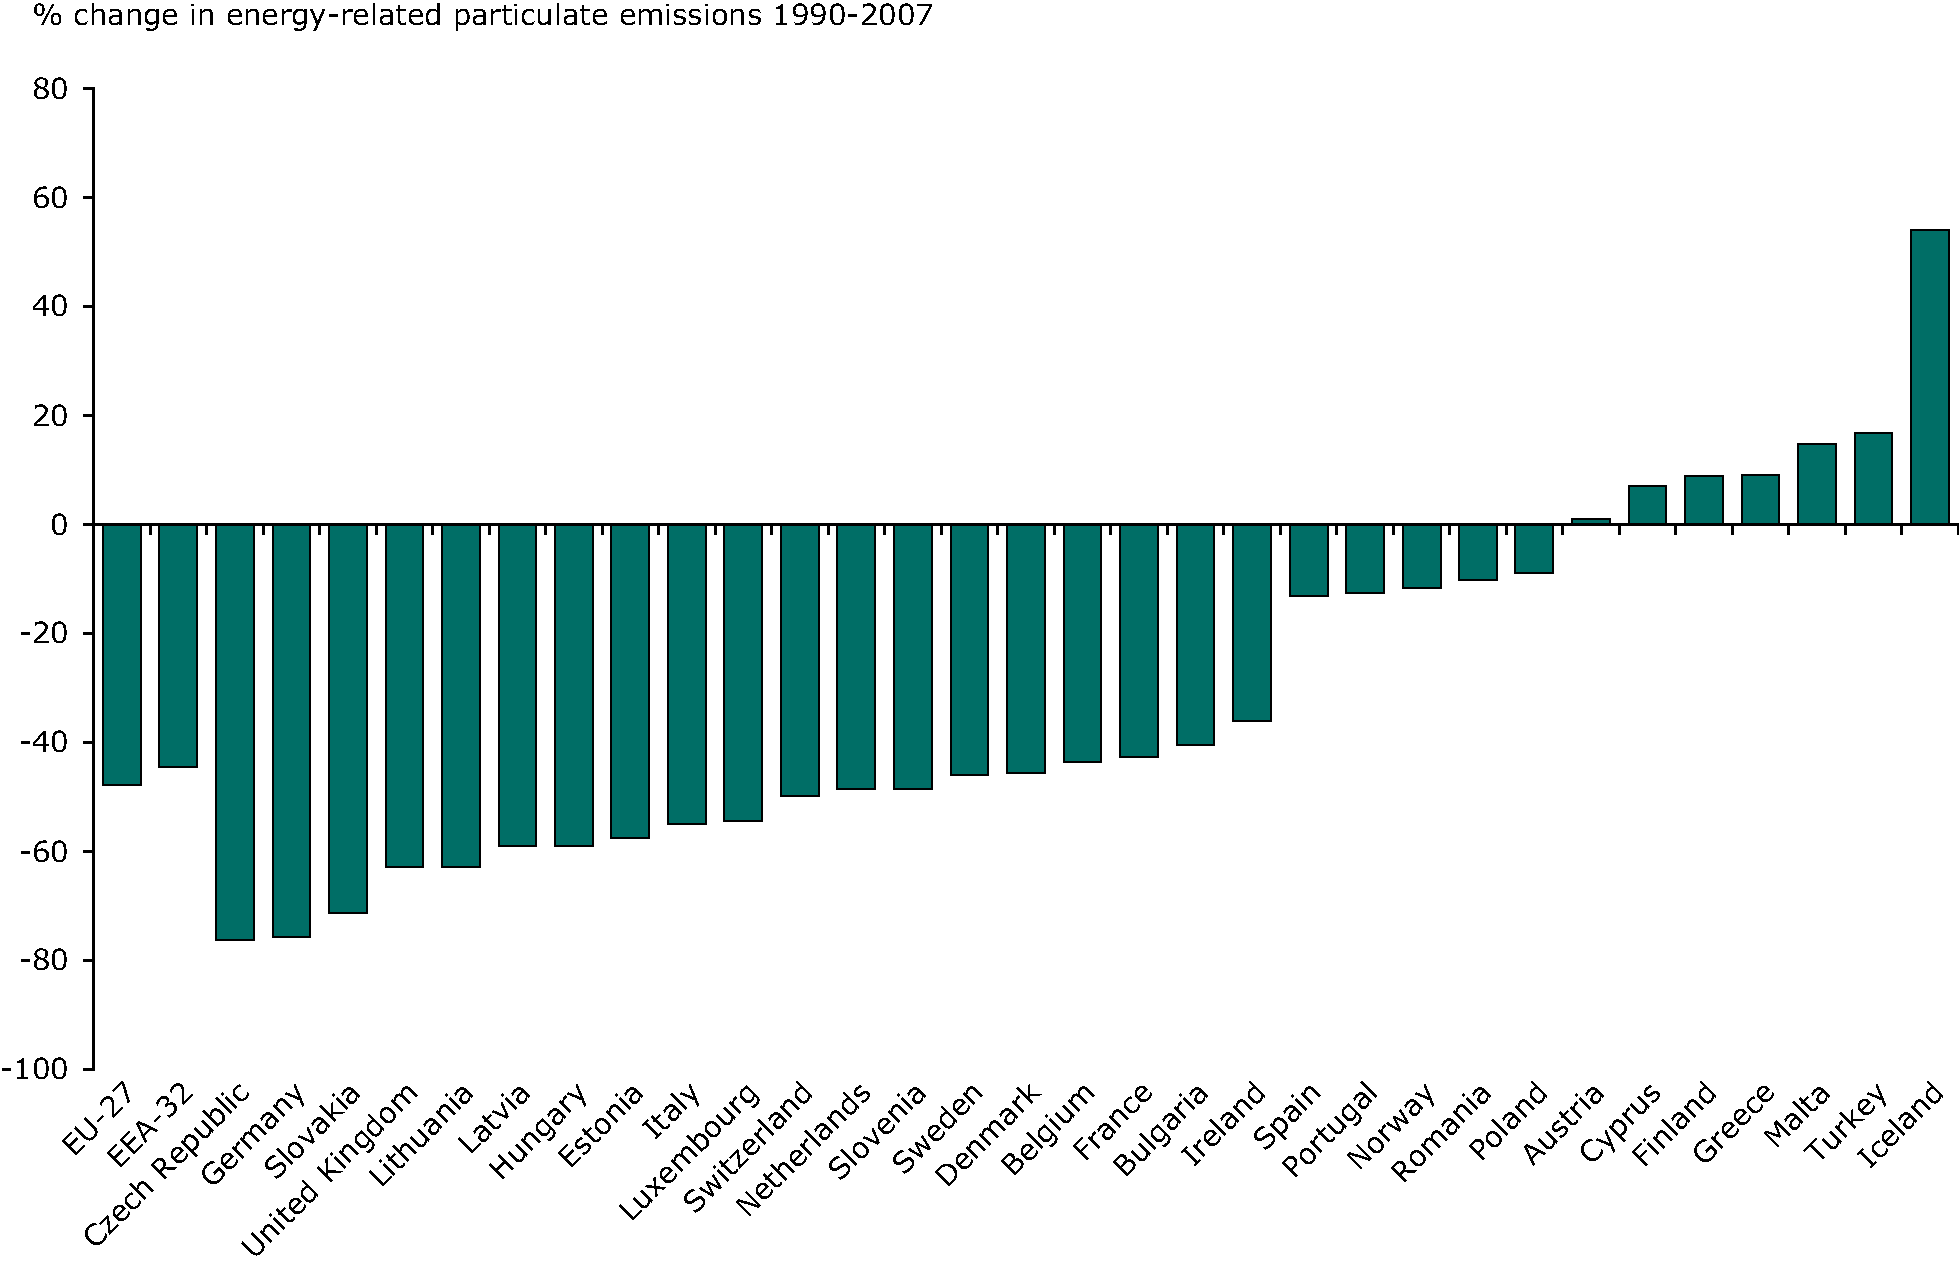 Overall change in energy-related (i.e. combustion) emissions of primary and secondary particles, 1990-2007